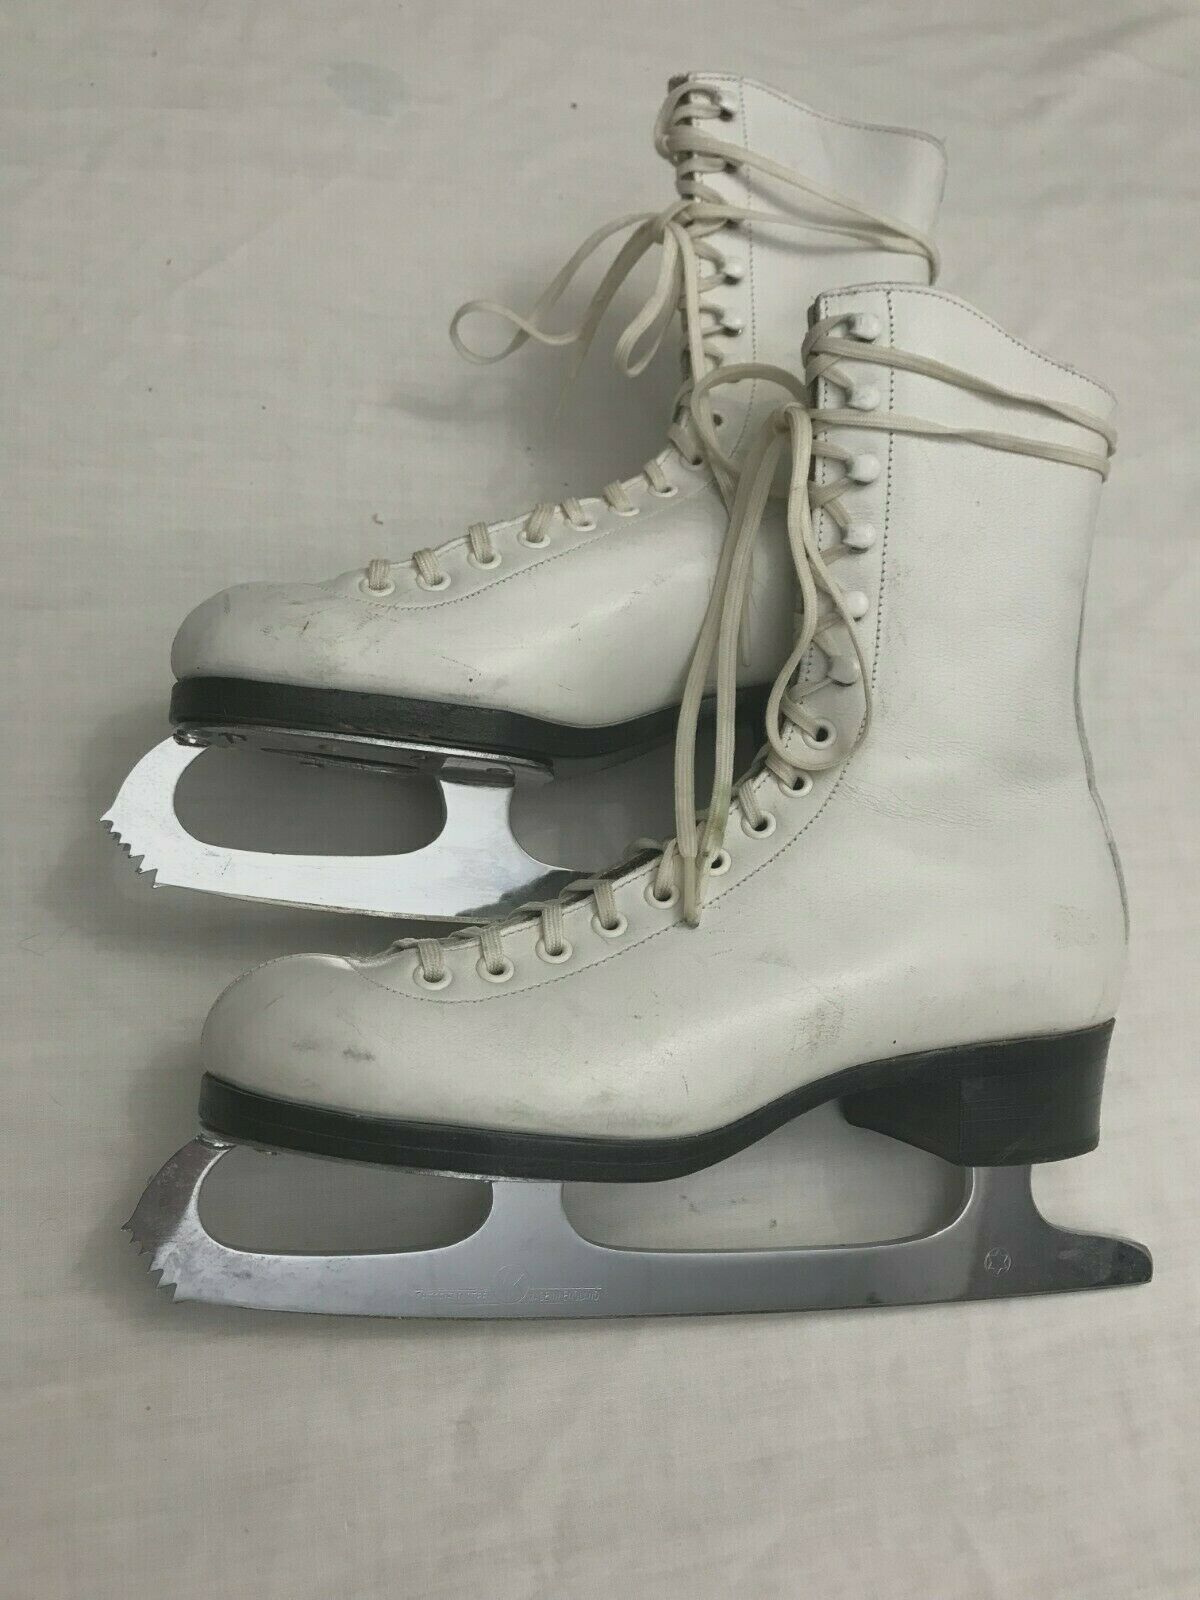 Riedell Red Wing Ice Skates Sheffield Blade Size 4 1/2